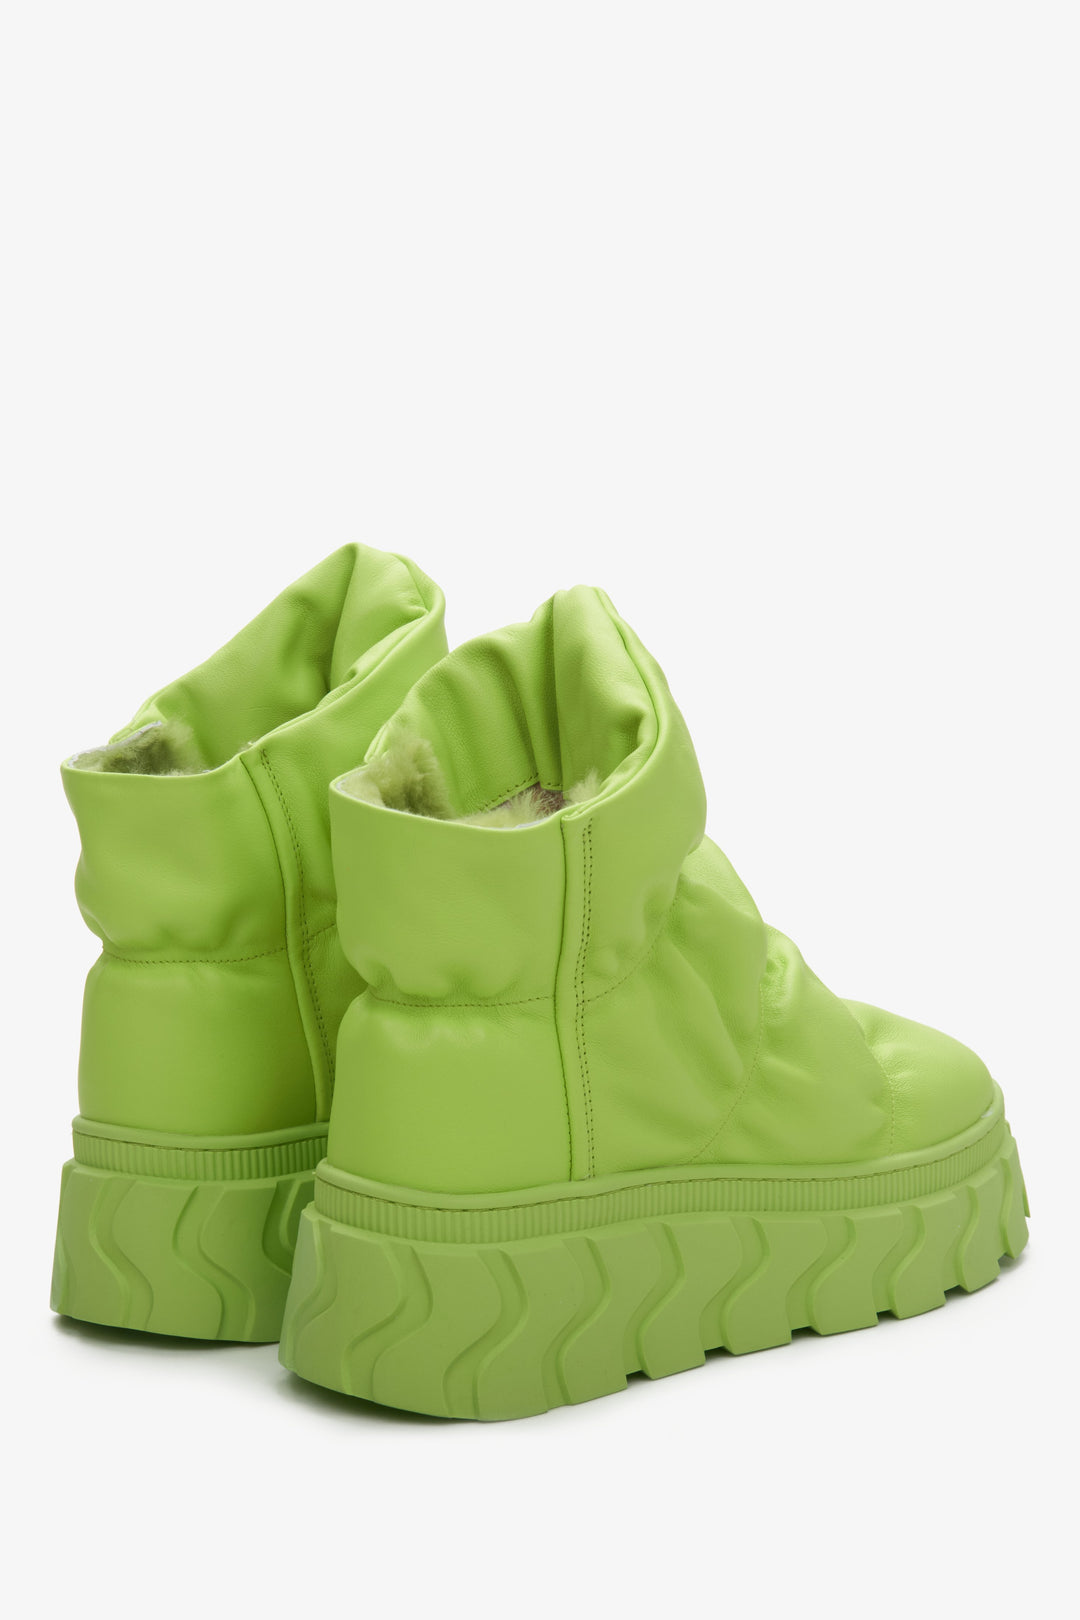 Women's warm and cozy green snow boots Estro - a close-up on shoe toe.